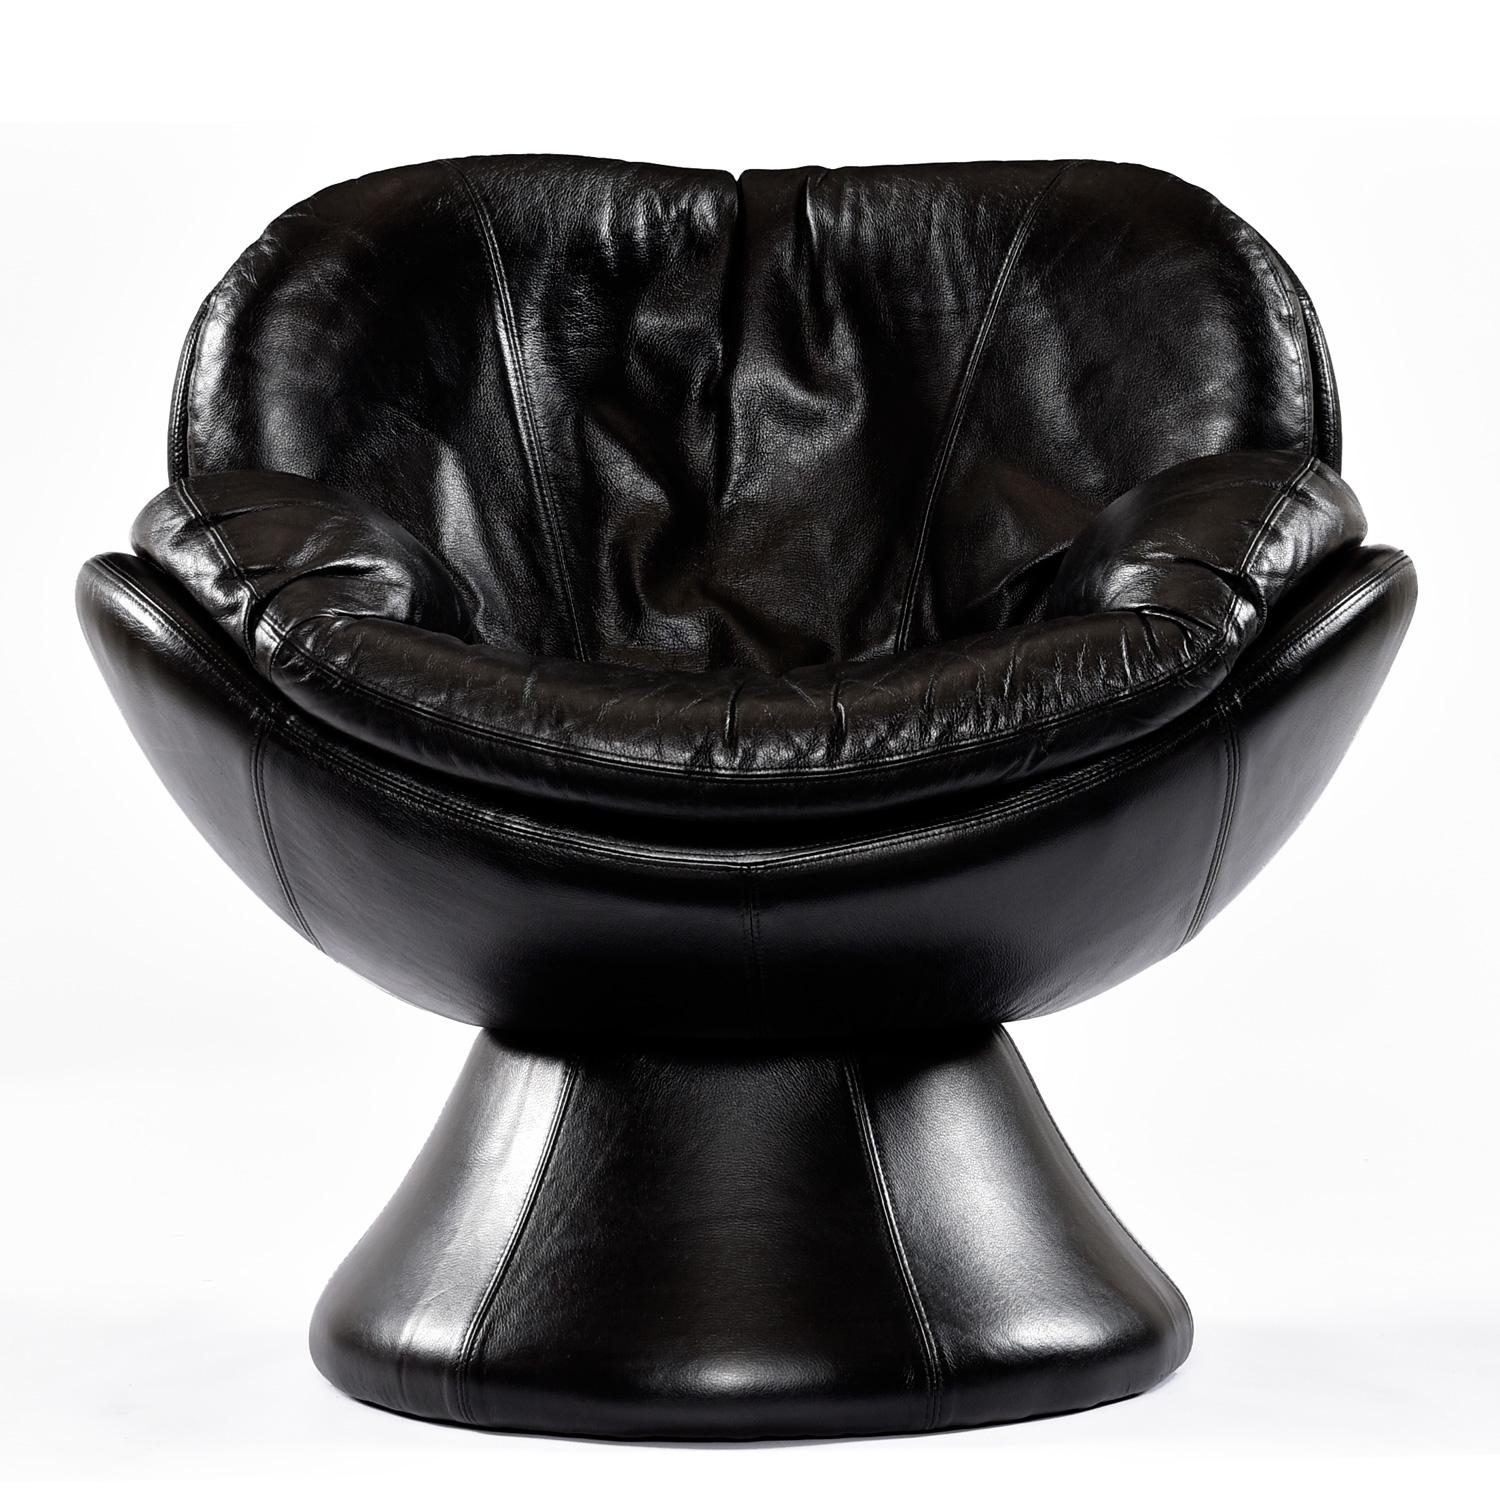  Post-Modern Pedestal Base Black Leather Swivel Pod Chairs by Jaymar of Canada In Good Condition For Sale In Chattanooga, TN